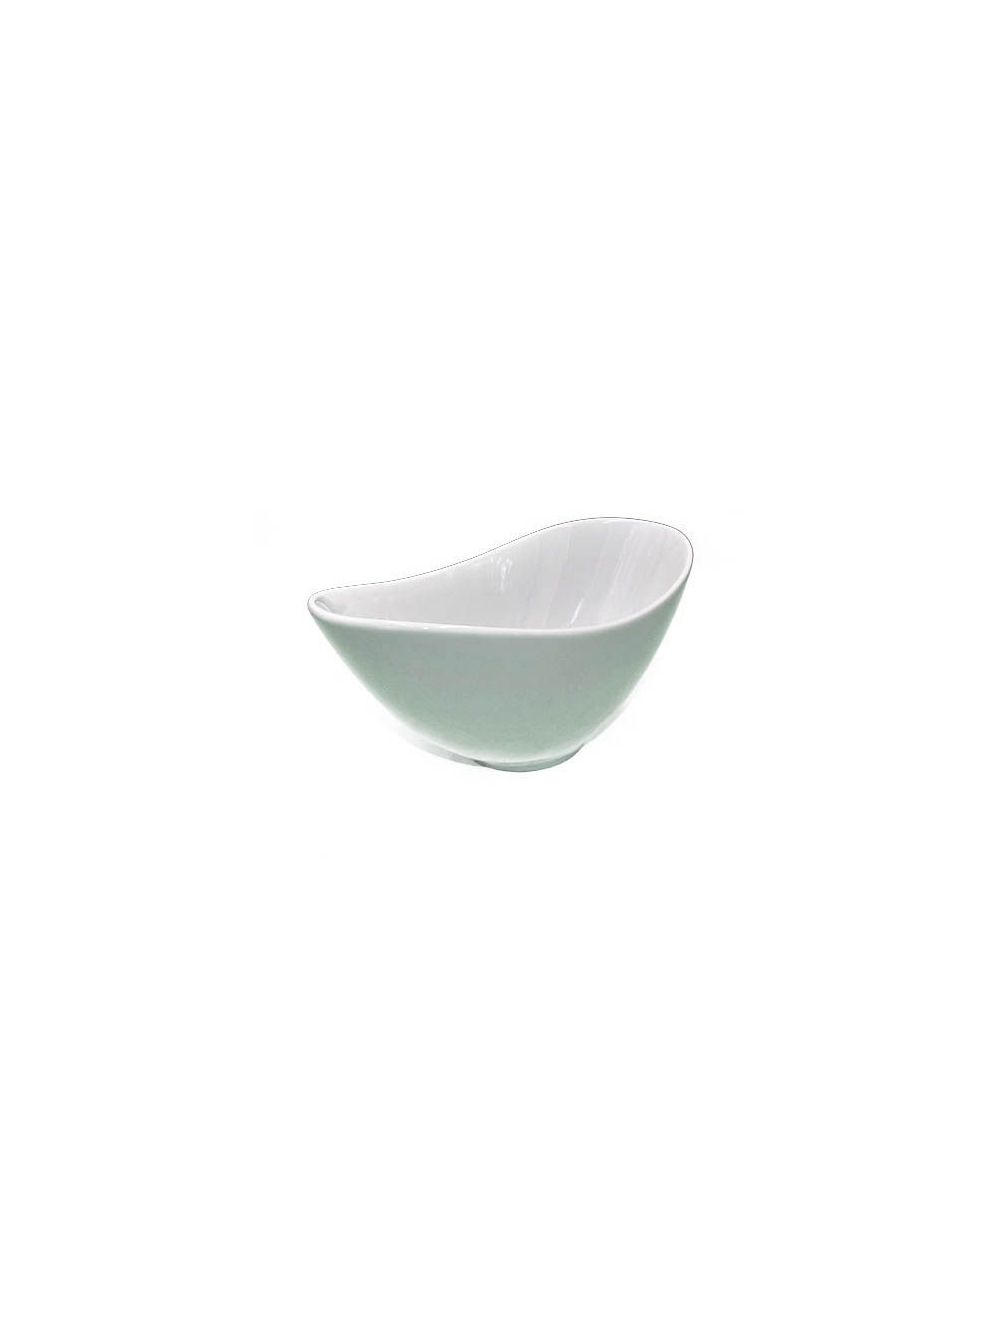 Gala Dolomite Footed Bowl 10 Inch